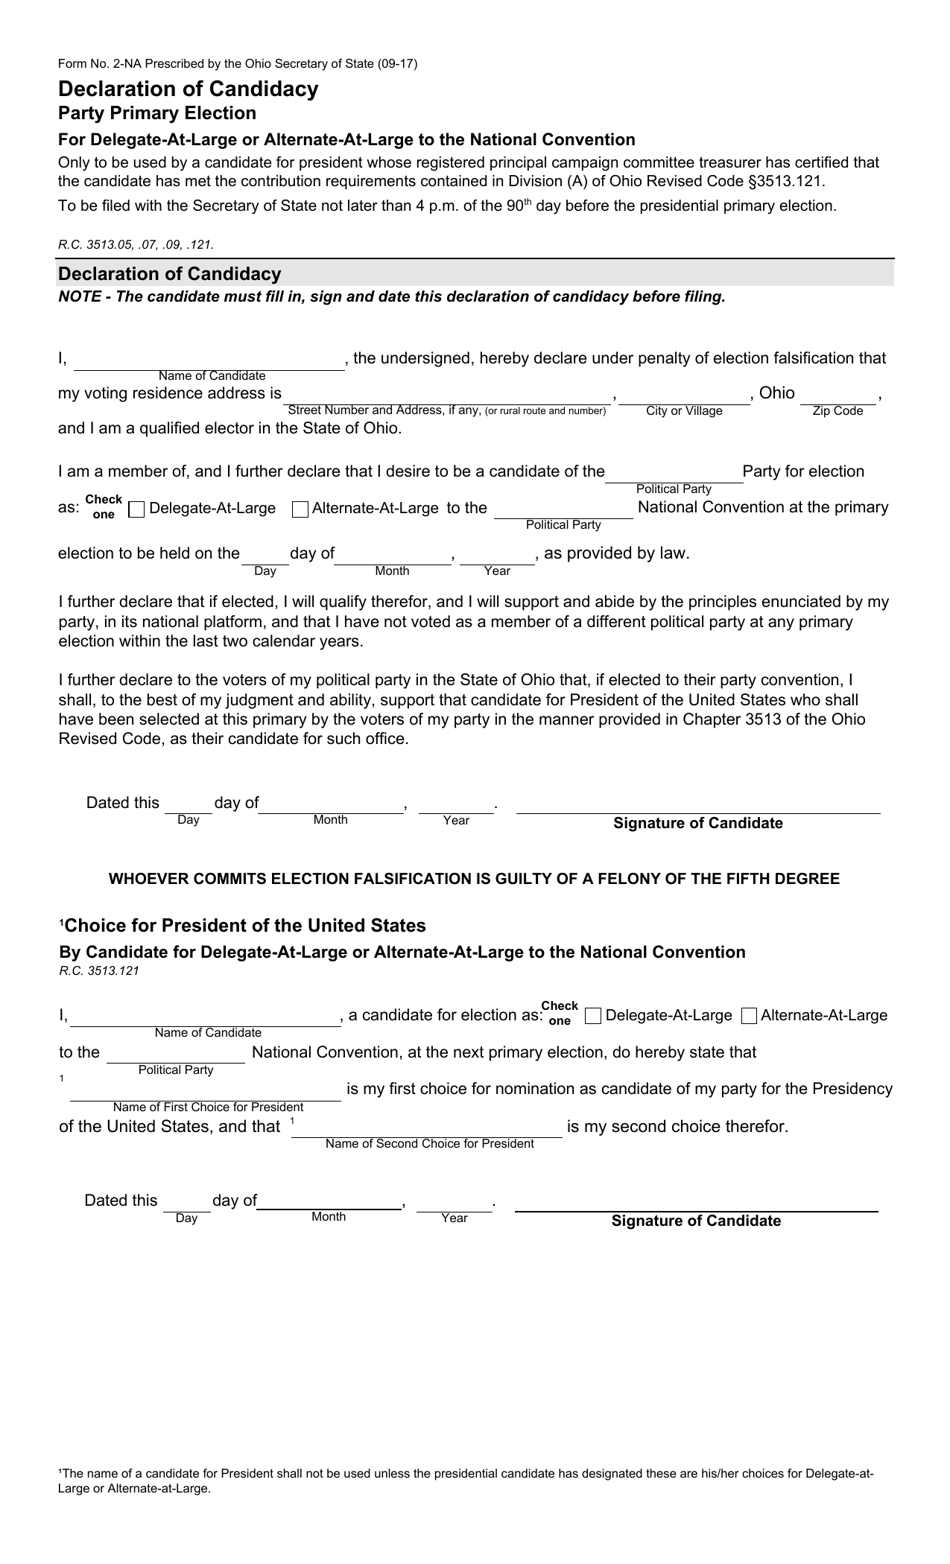 Form 2-NA Declaration of Candidacy - Party Primary Election for Delegate-At-Large or Alternate-At-Large to the National Convention - Ohio, Page 1